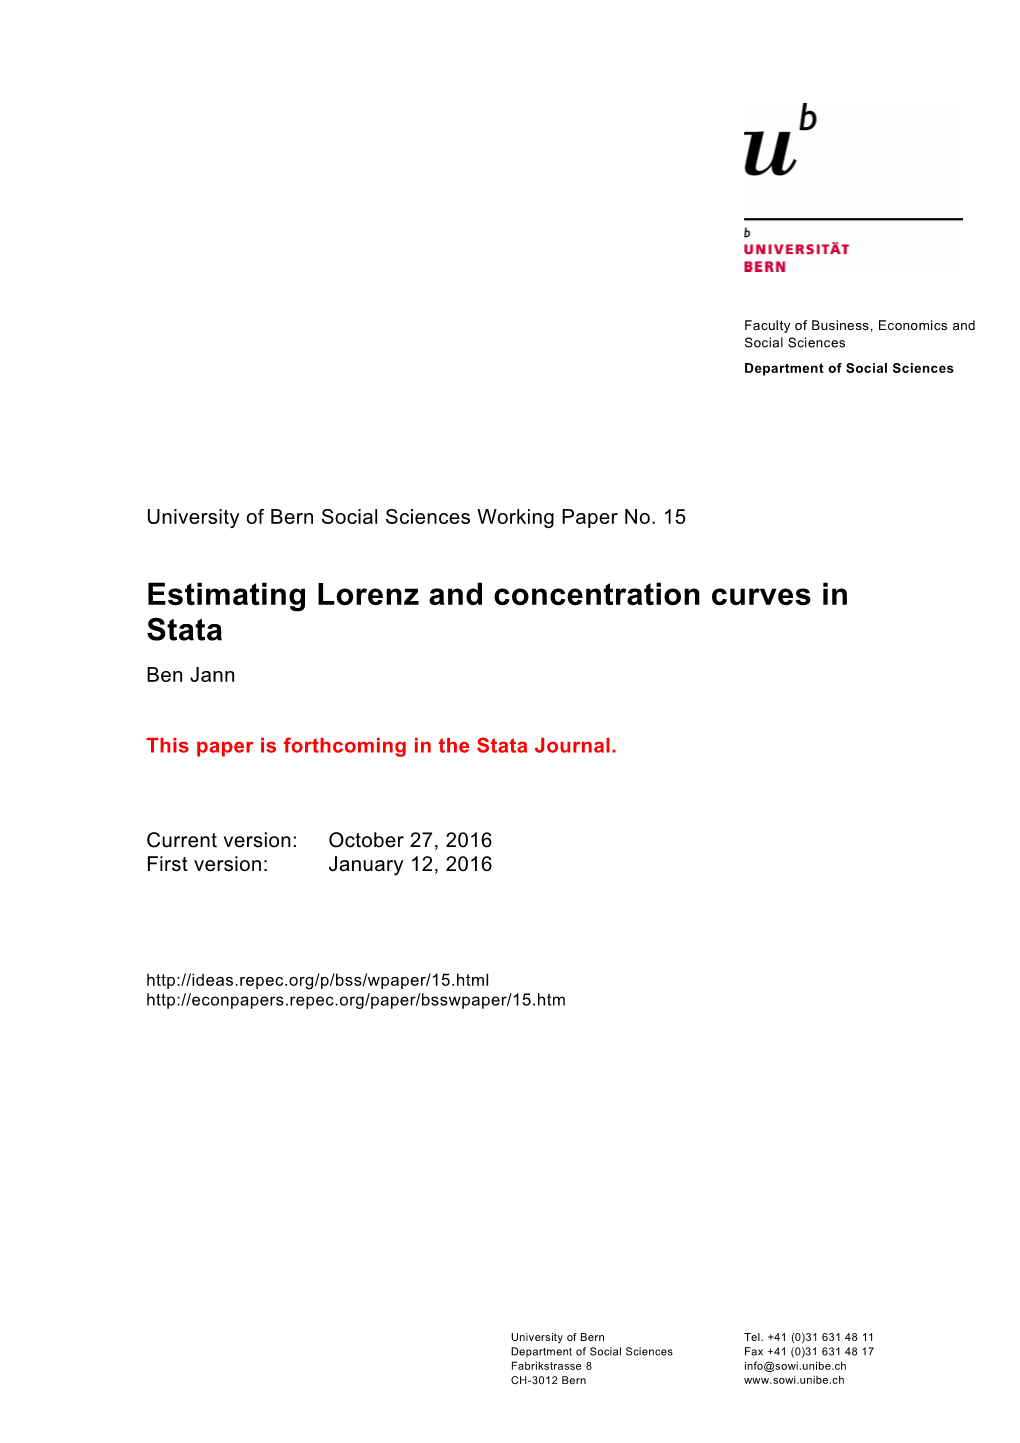 Estimating Lorenz and Concentration Curves in Stata